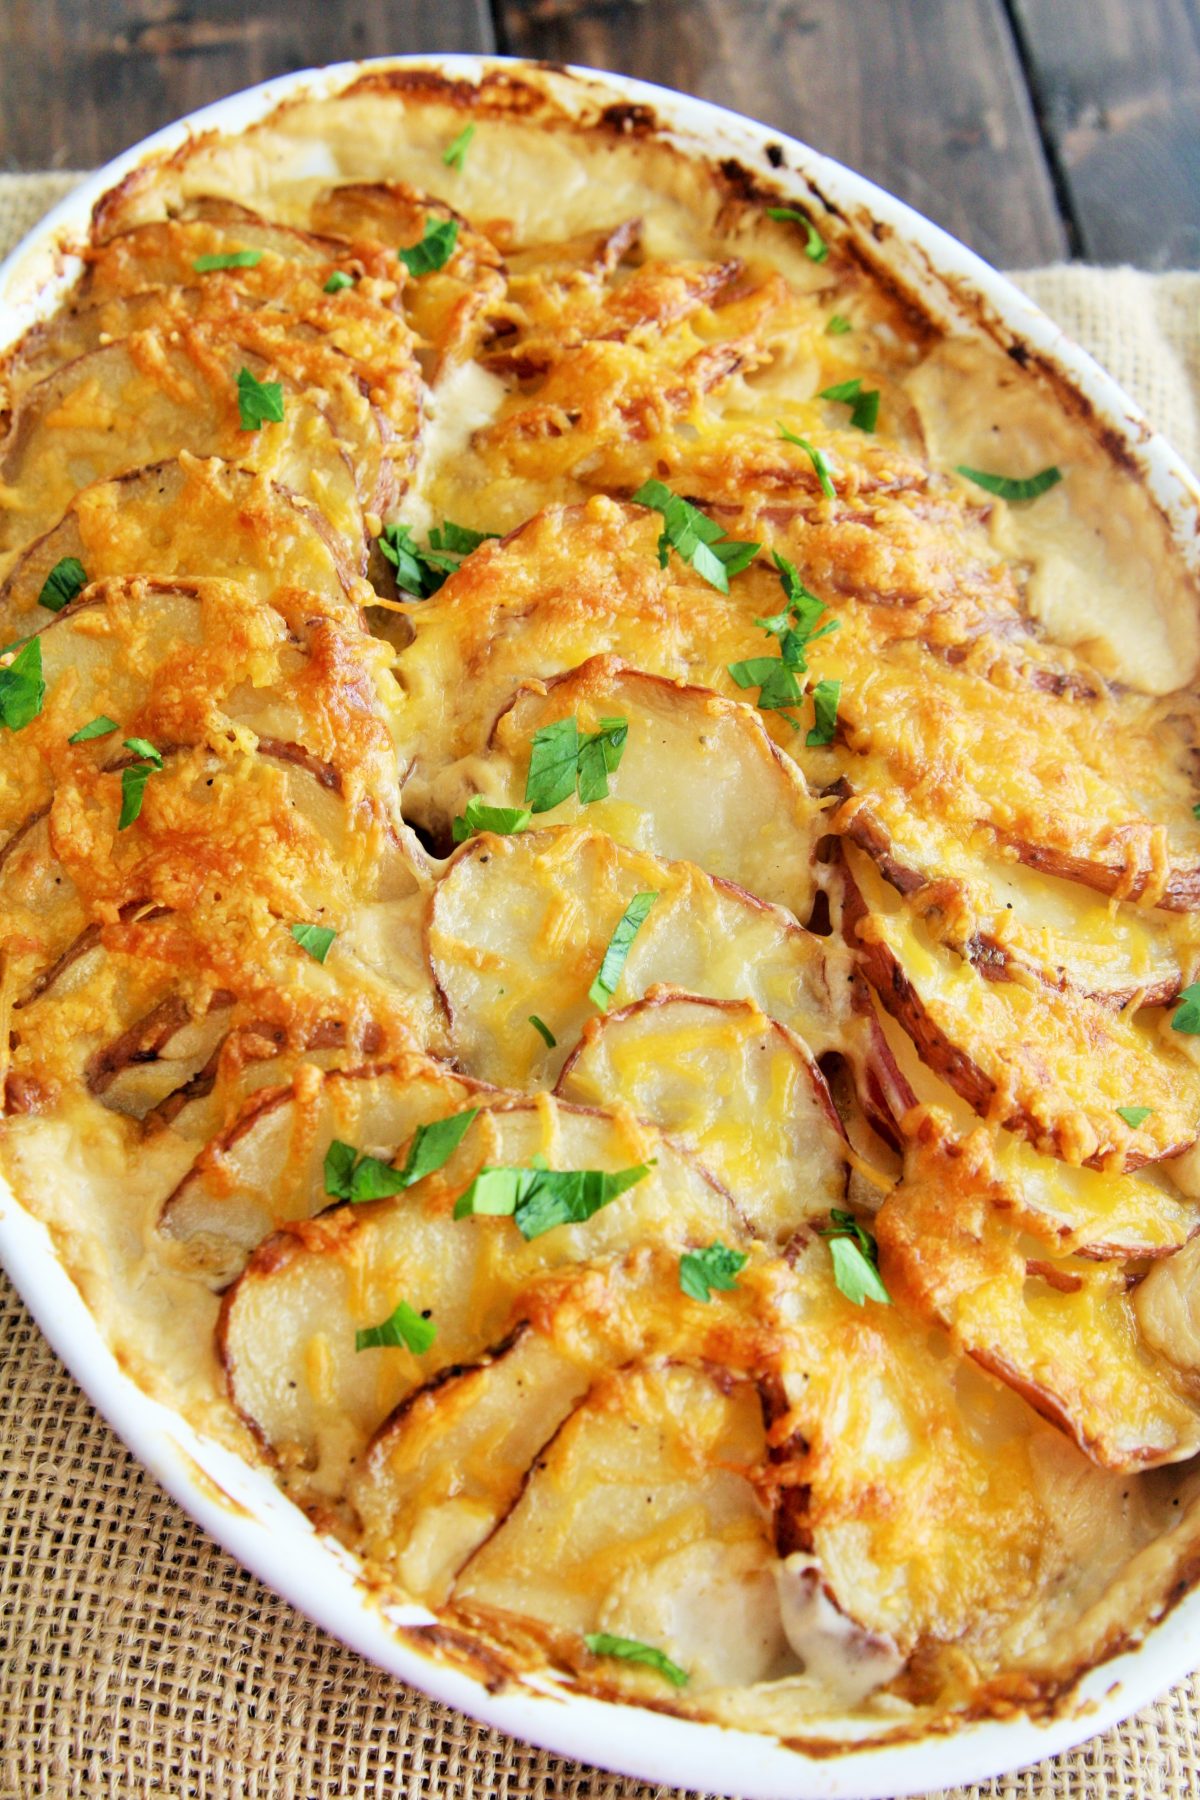 What Goes With Au Gratin Potatoes